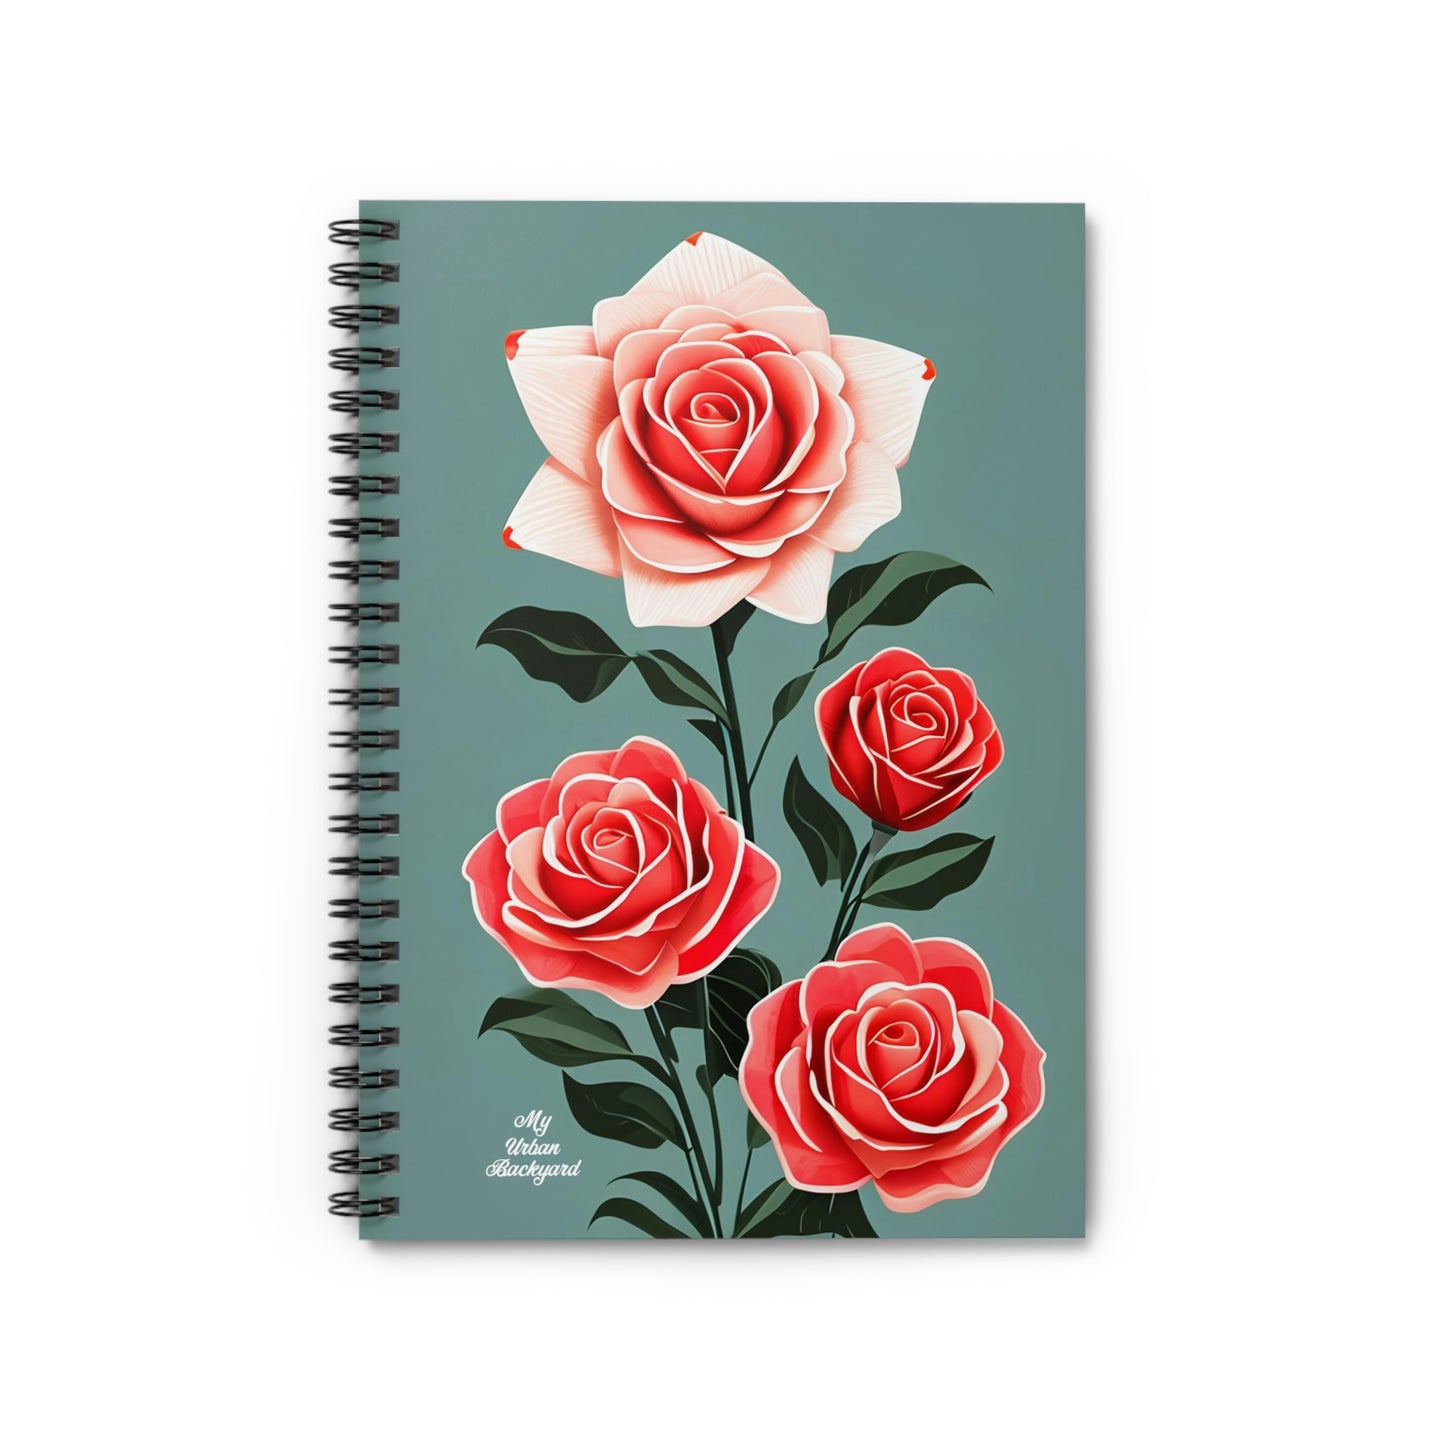 Roses, Spiral Notebook Journal - Write in Style